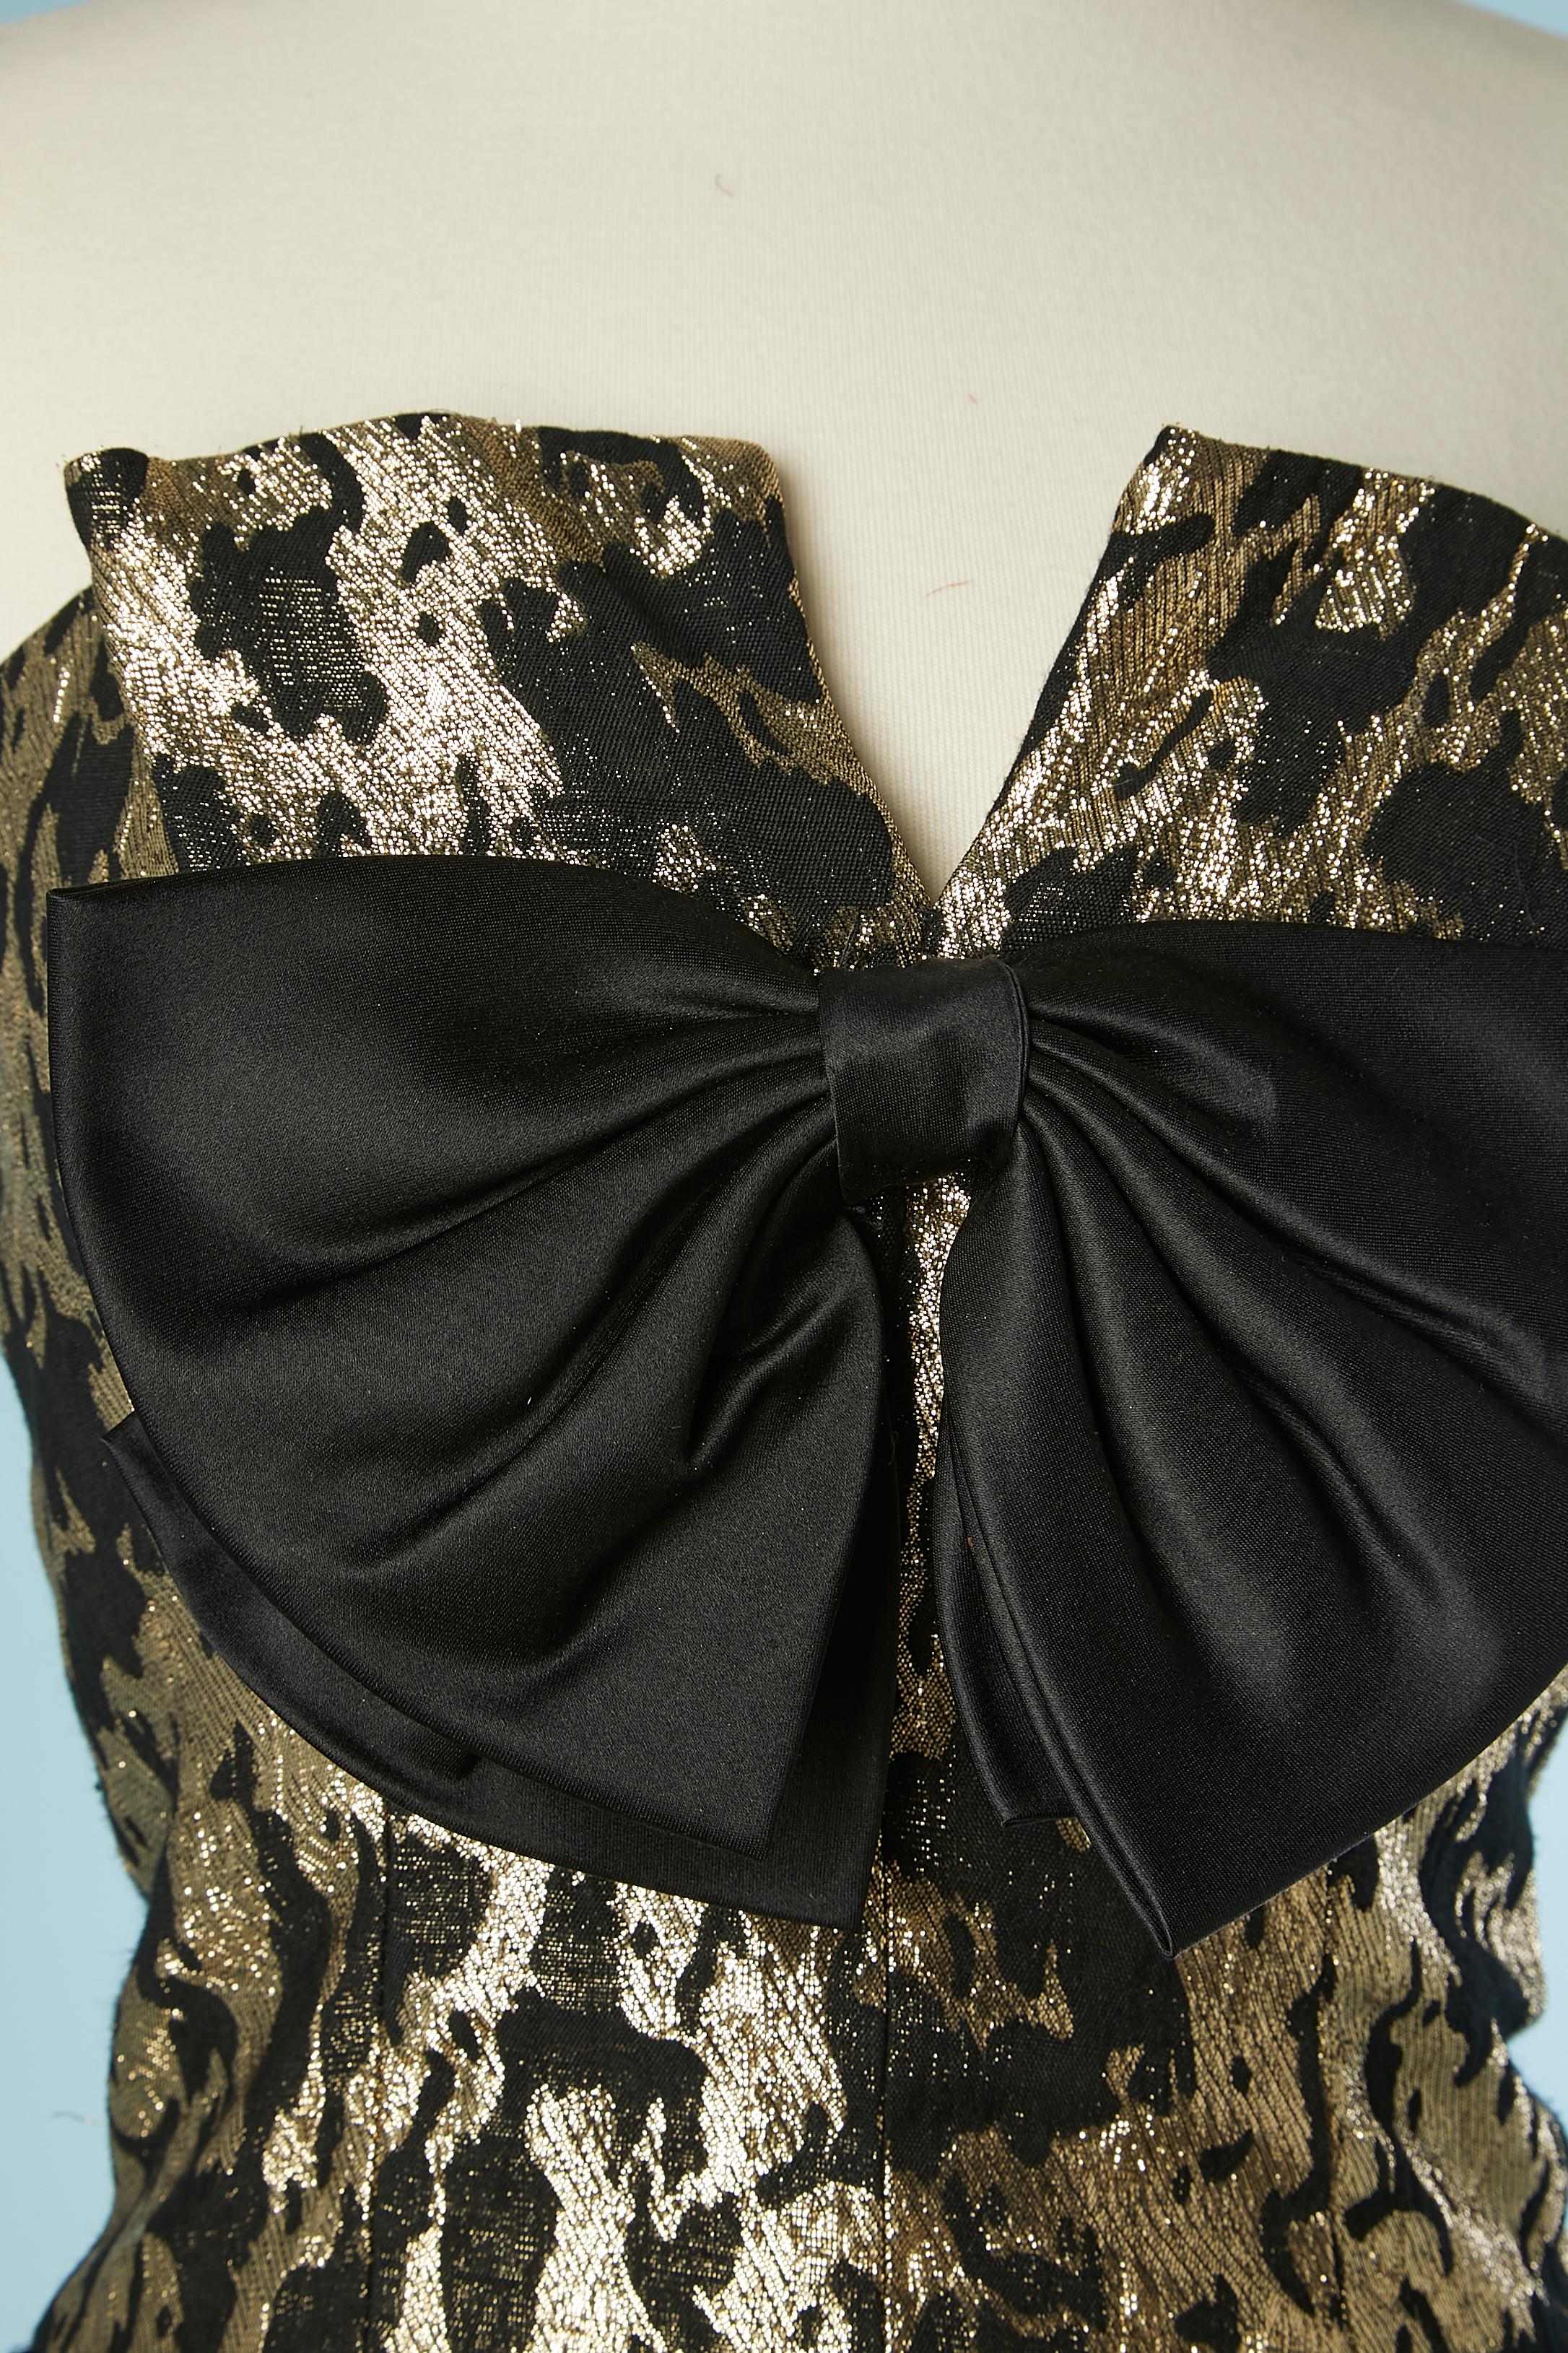  Gold and black brocade bustier cocktail dress. Black satin bow in the middle front. Boned bustier. Polyester lining and tulle petticoat with ruffles. Zip and hook&eye in the middle back. 
SIZE 4 US 